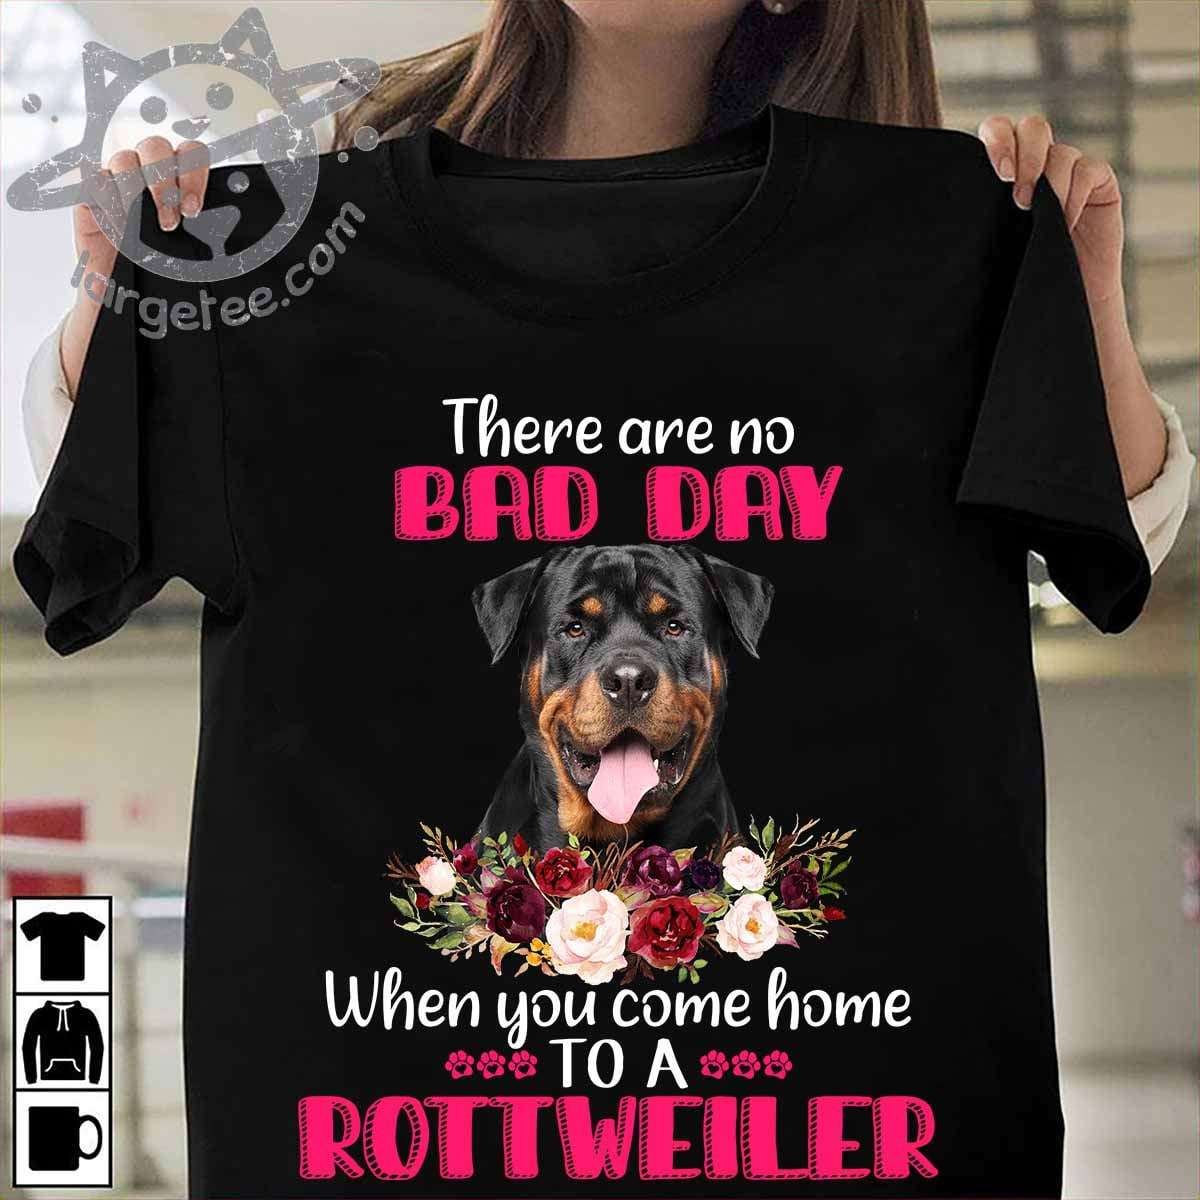 Rottweiler Dog - There are no bad day when you come home to a rottweiler